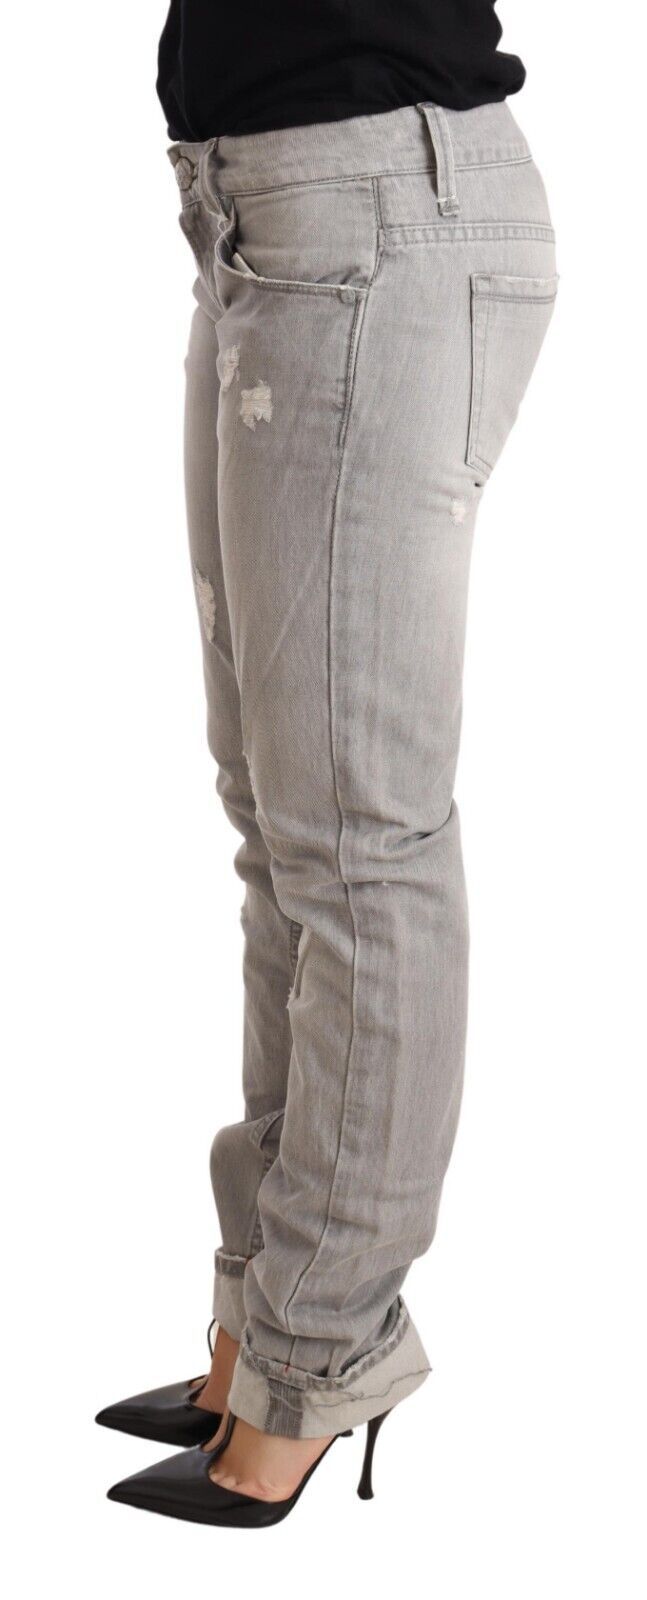 Chic Slim Fit Tattered Gray Wash Jeans